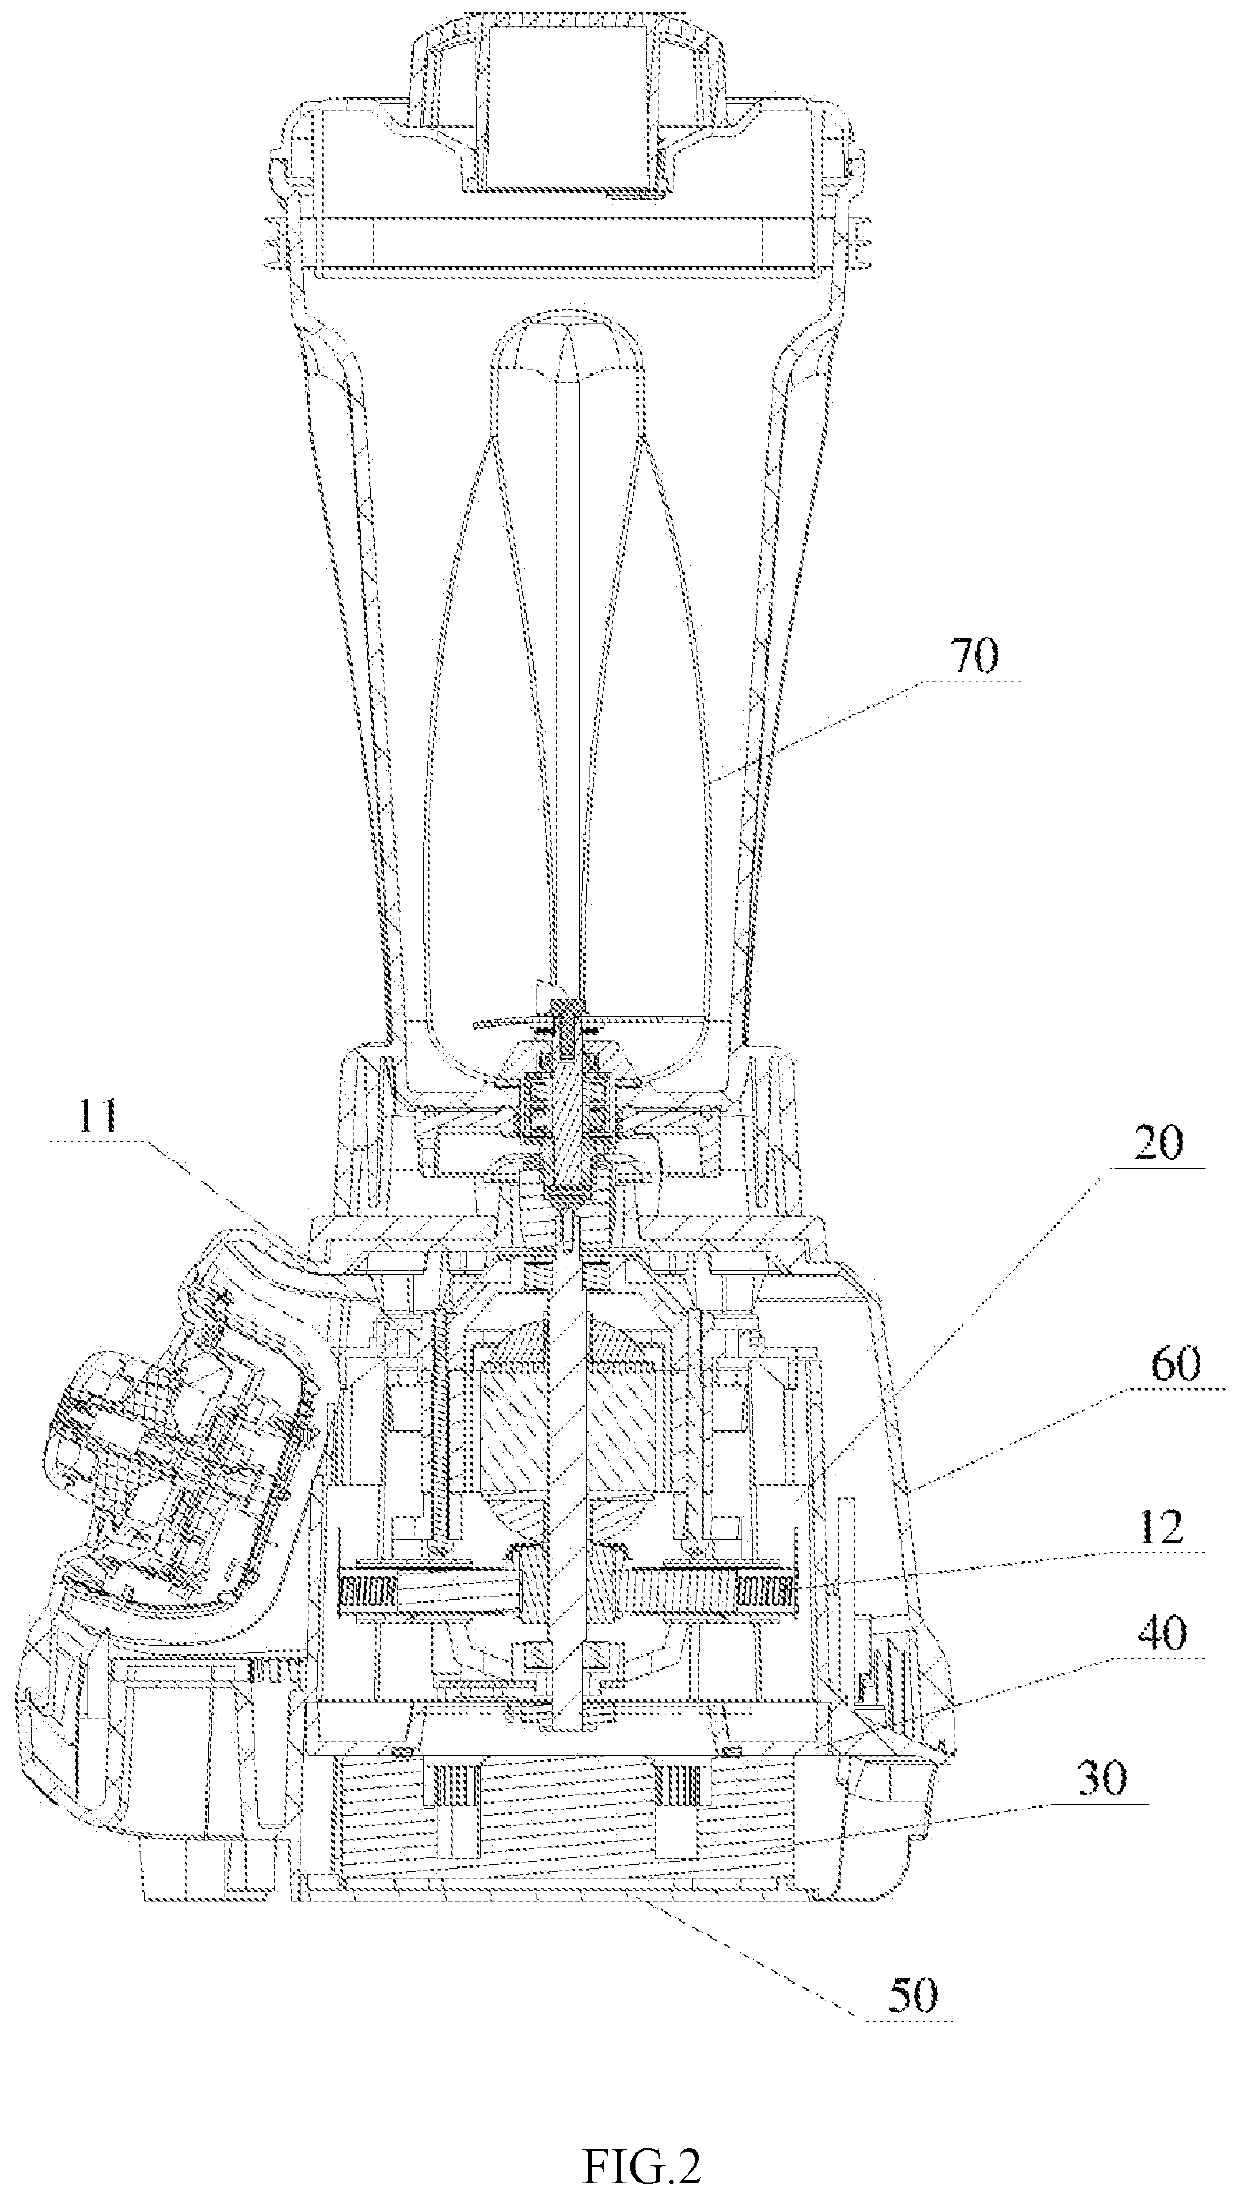 Air circulation and ventilation apparatus for food processing machine